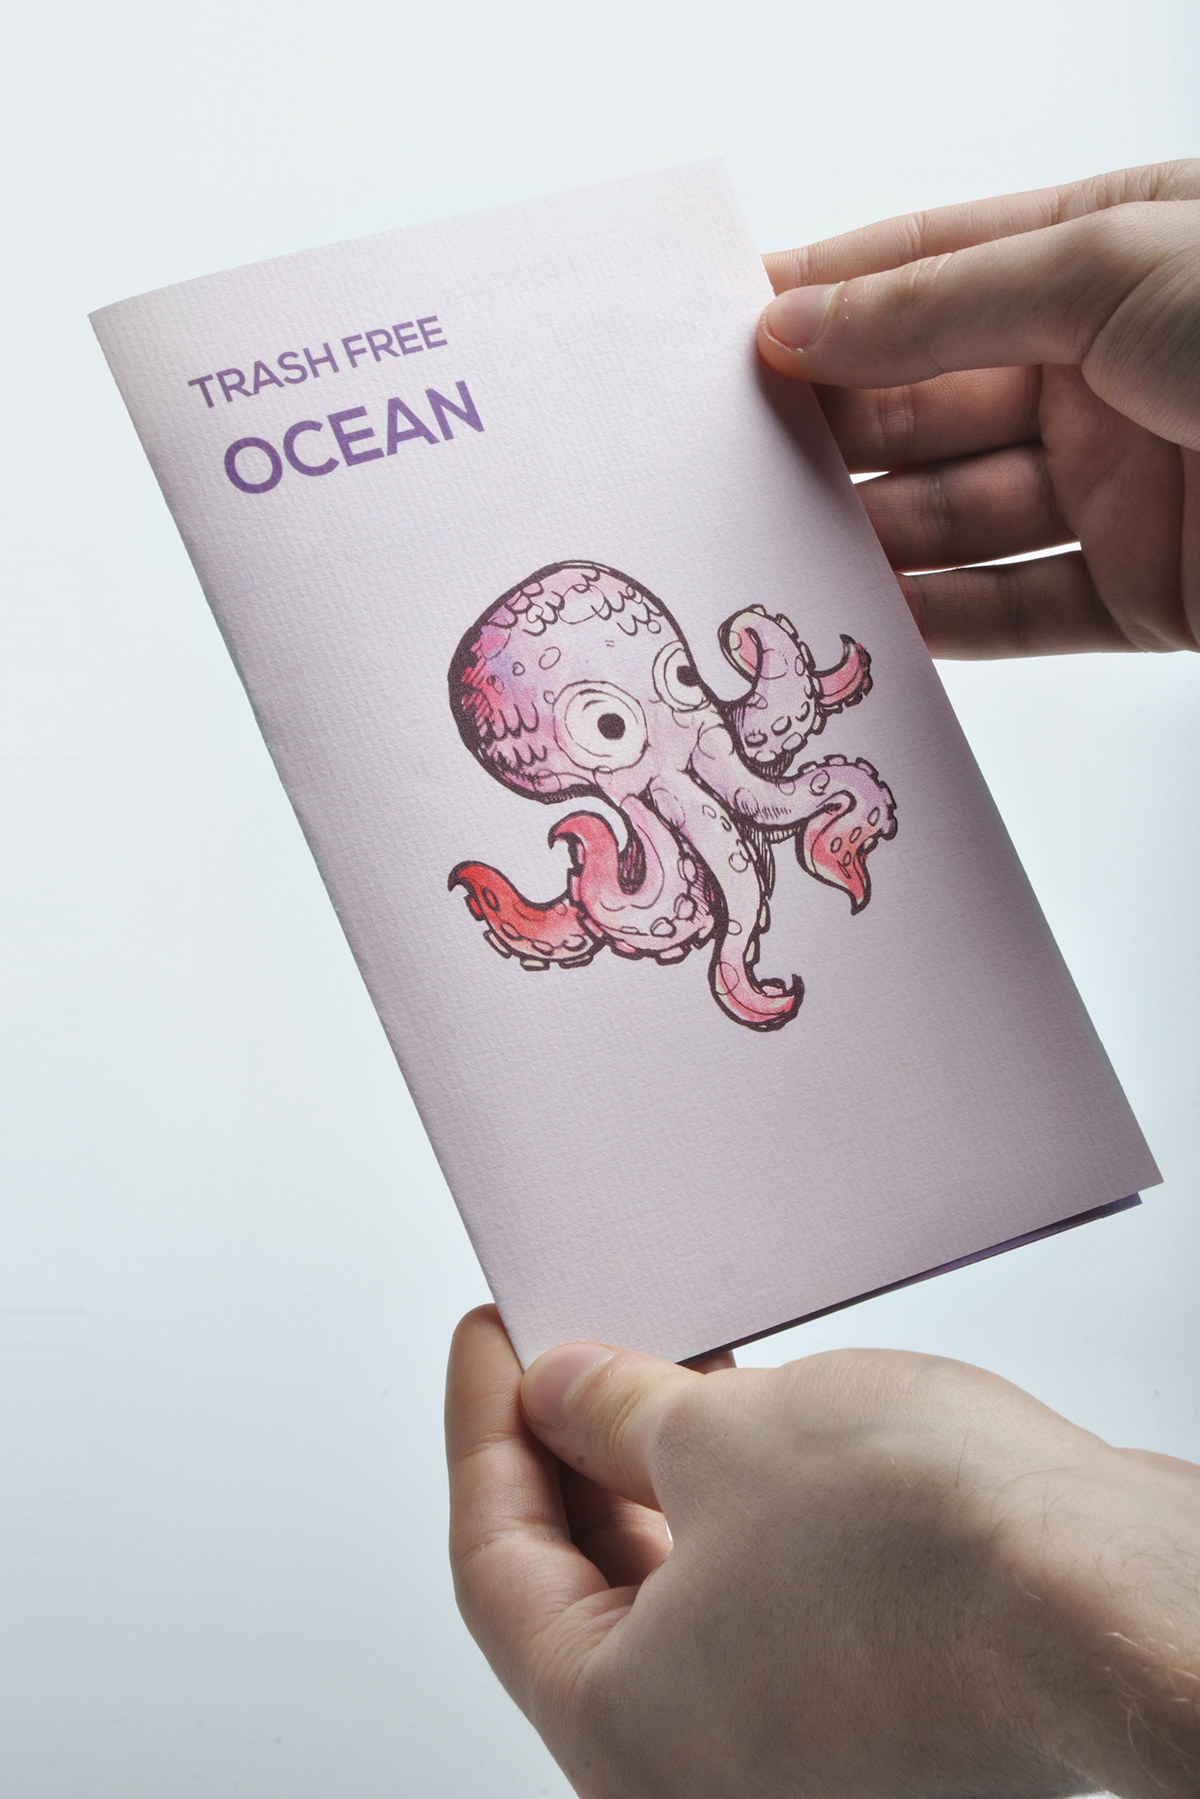 animal pamphlet marine life Ocean water octopus crab fish Squid Turtle sea turtle color box Whale